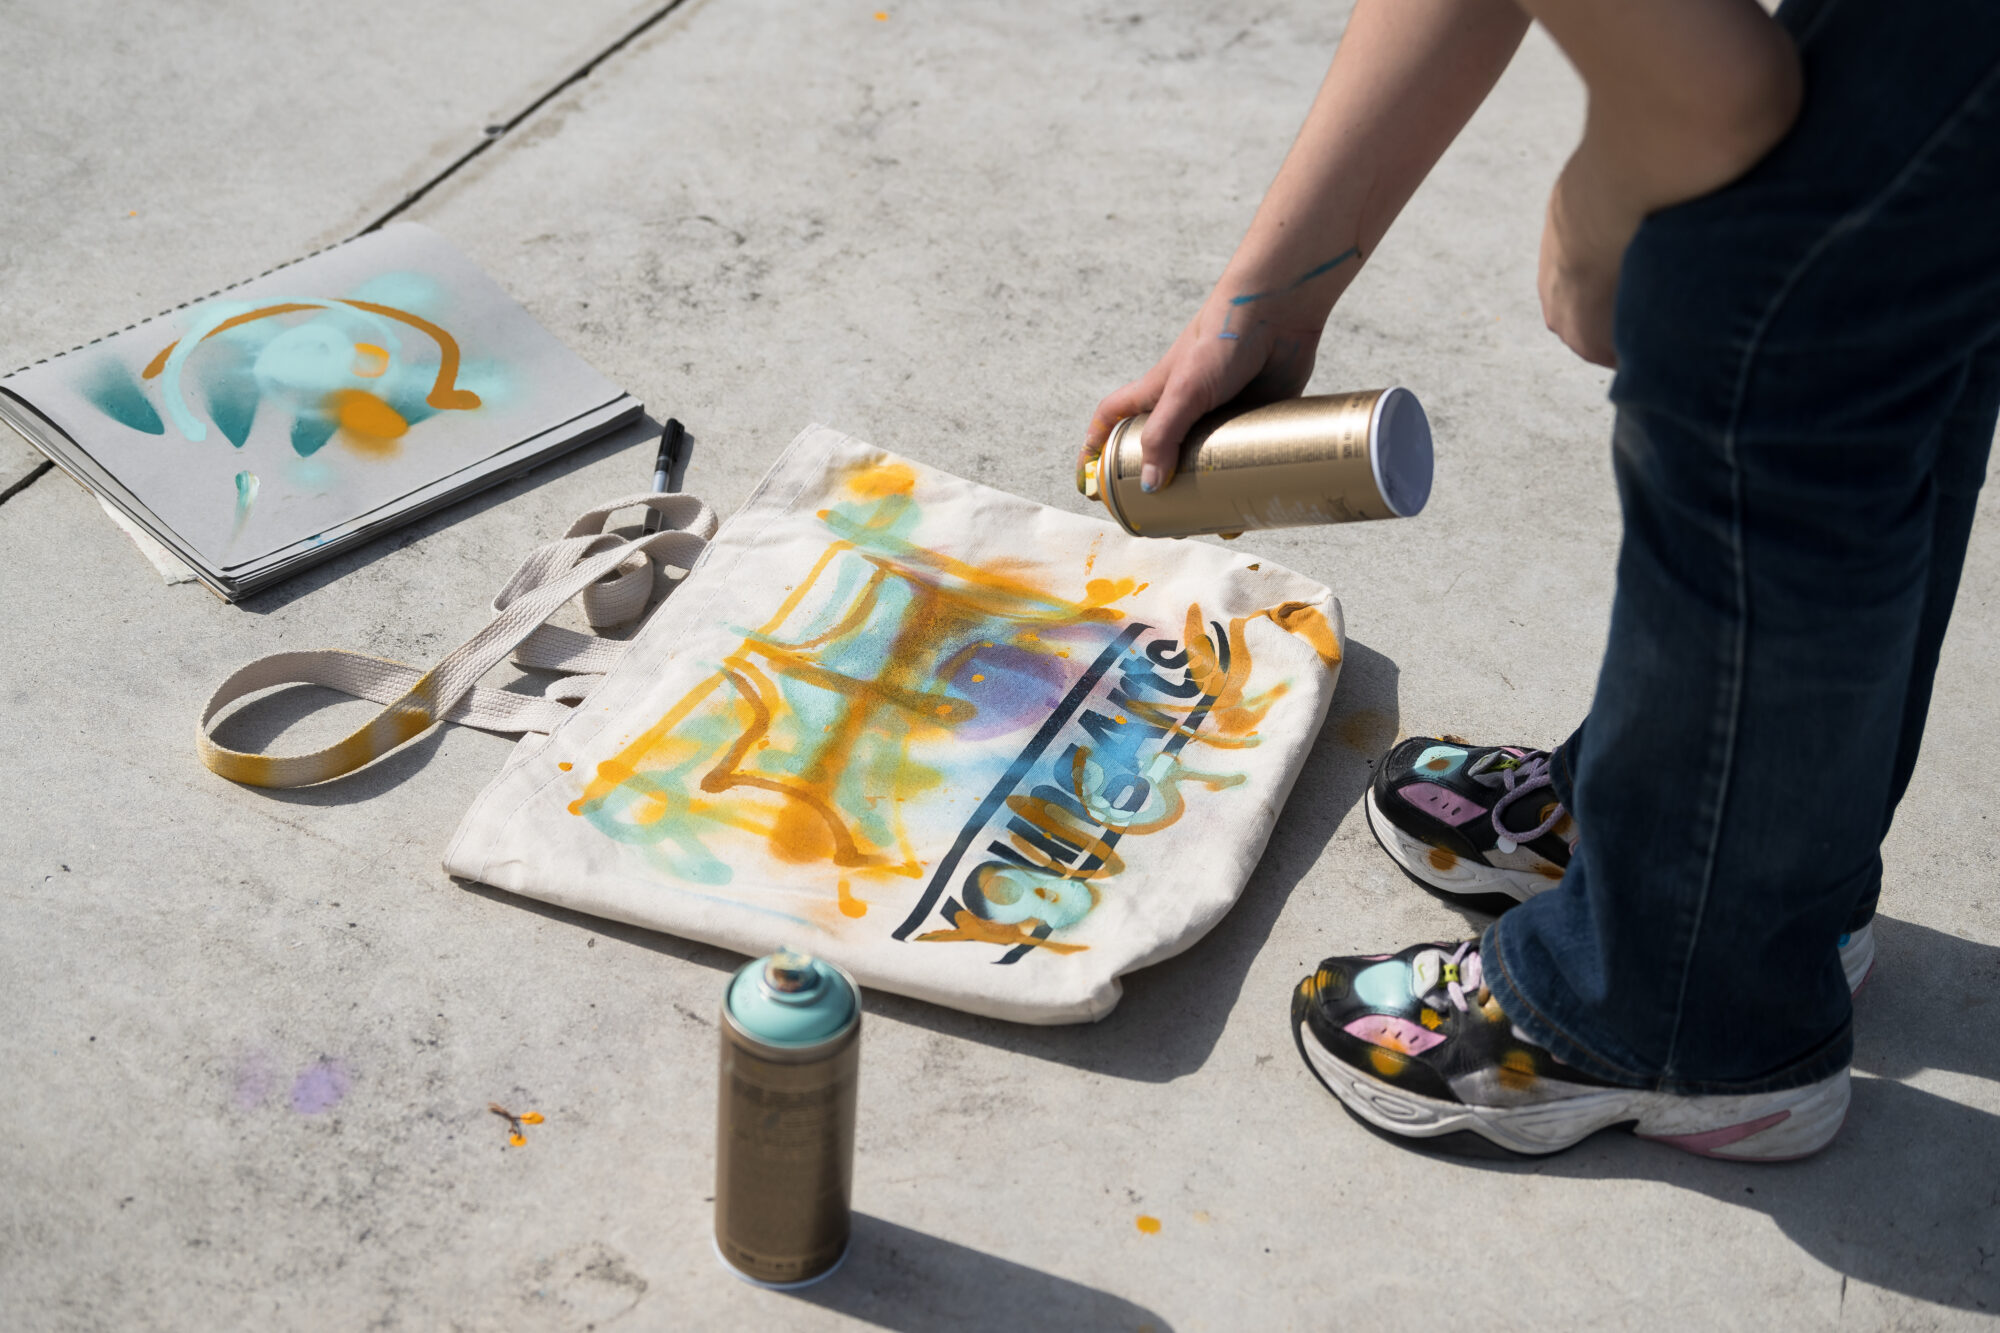 YoungArts tote bag on cement floor with a spray painting the bag